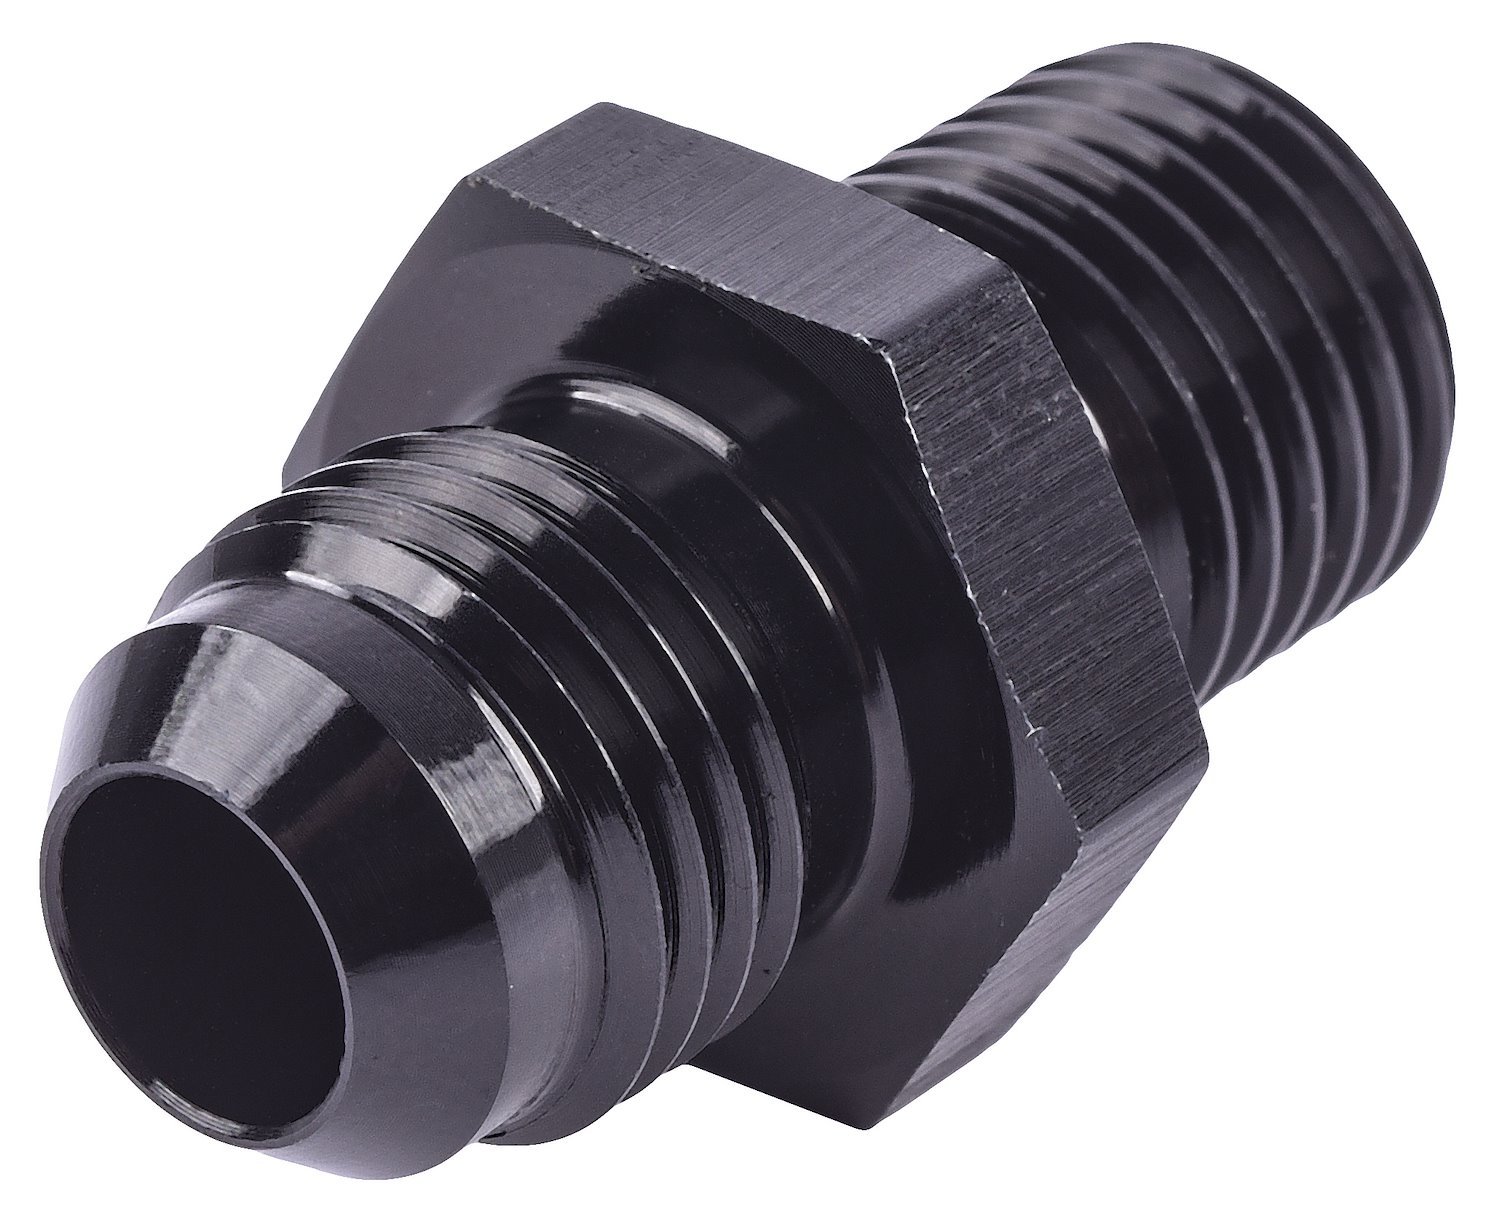 AN to Metric Adapter Fitting [-6 AN Male to 14mm x 1.5 Male, Black]